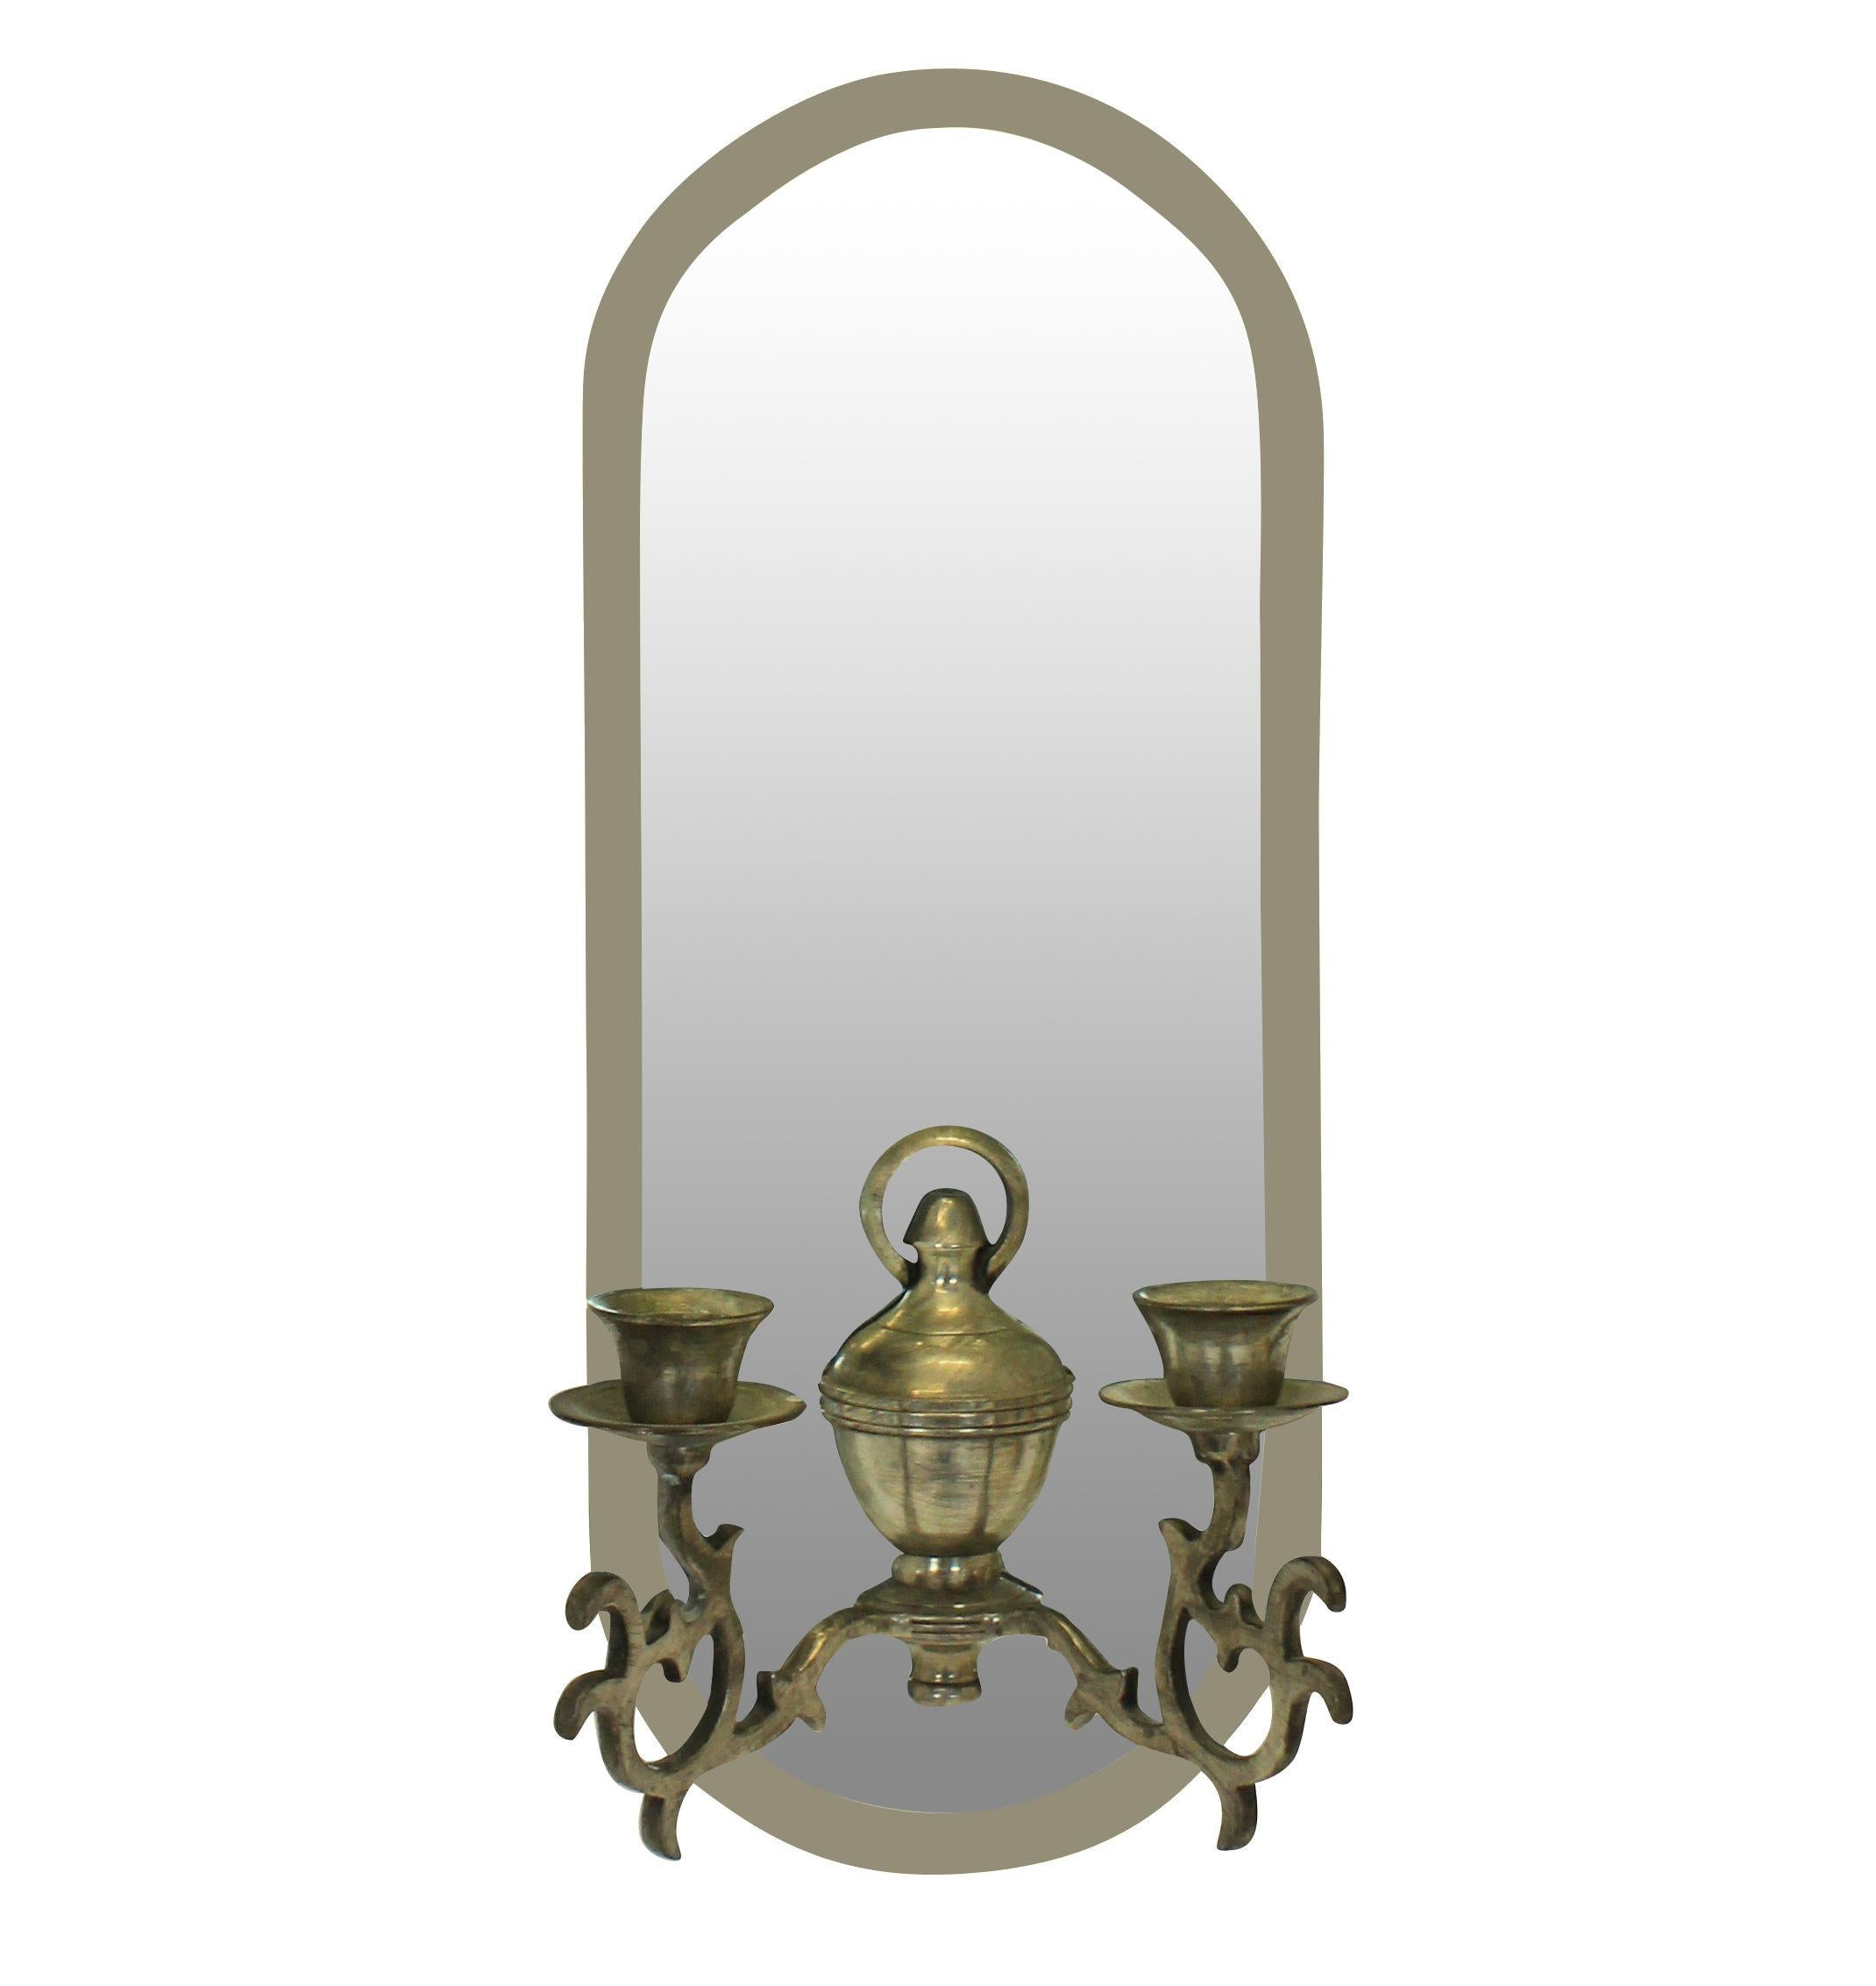 A pair of French mirrored girandole of simple design with twin lights. Can be electrified or used with candles.